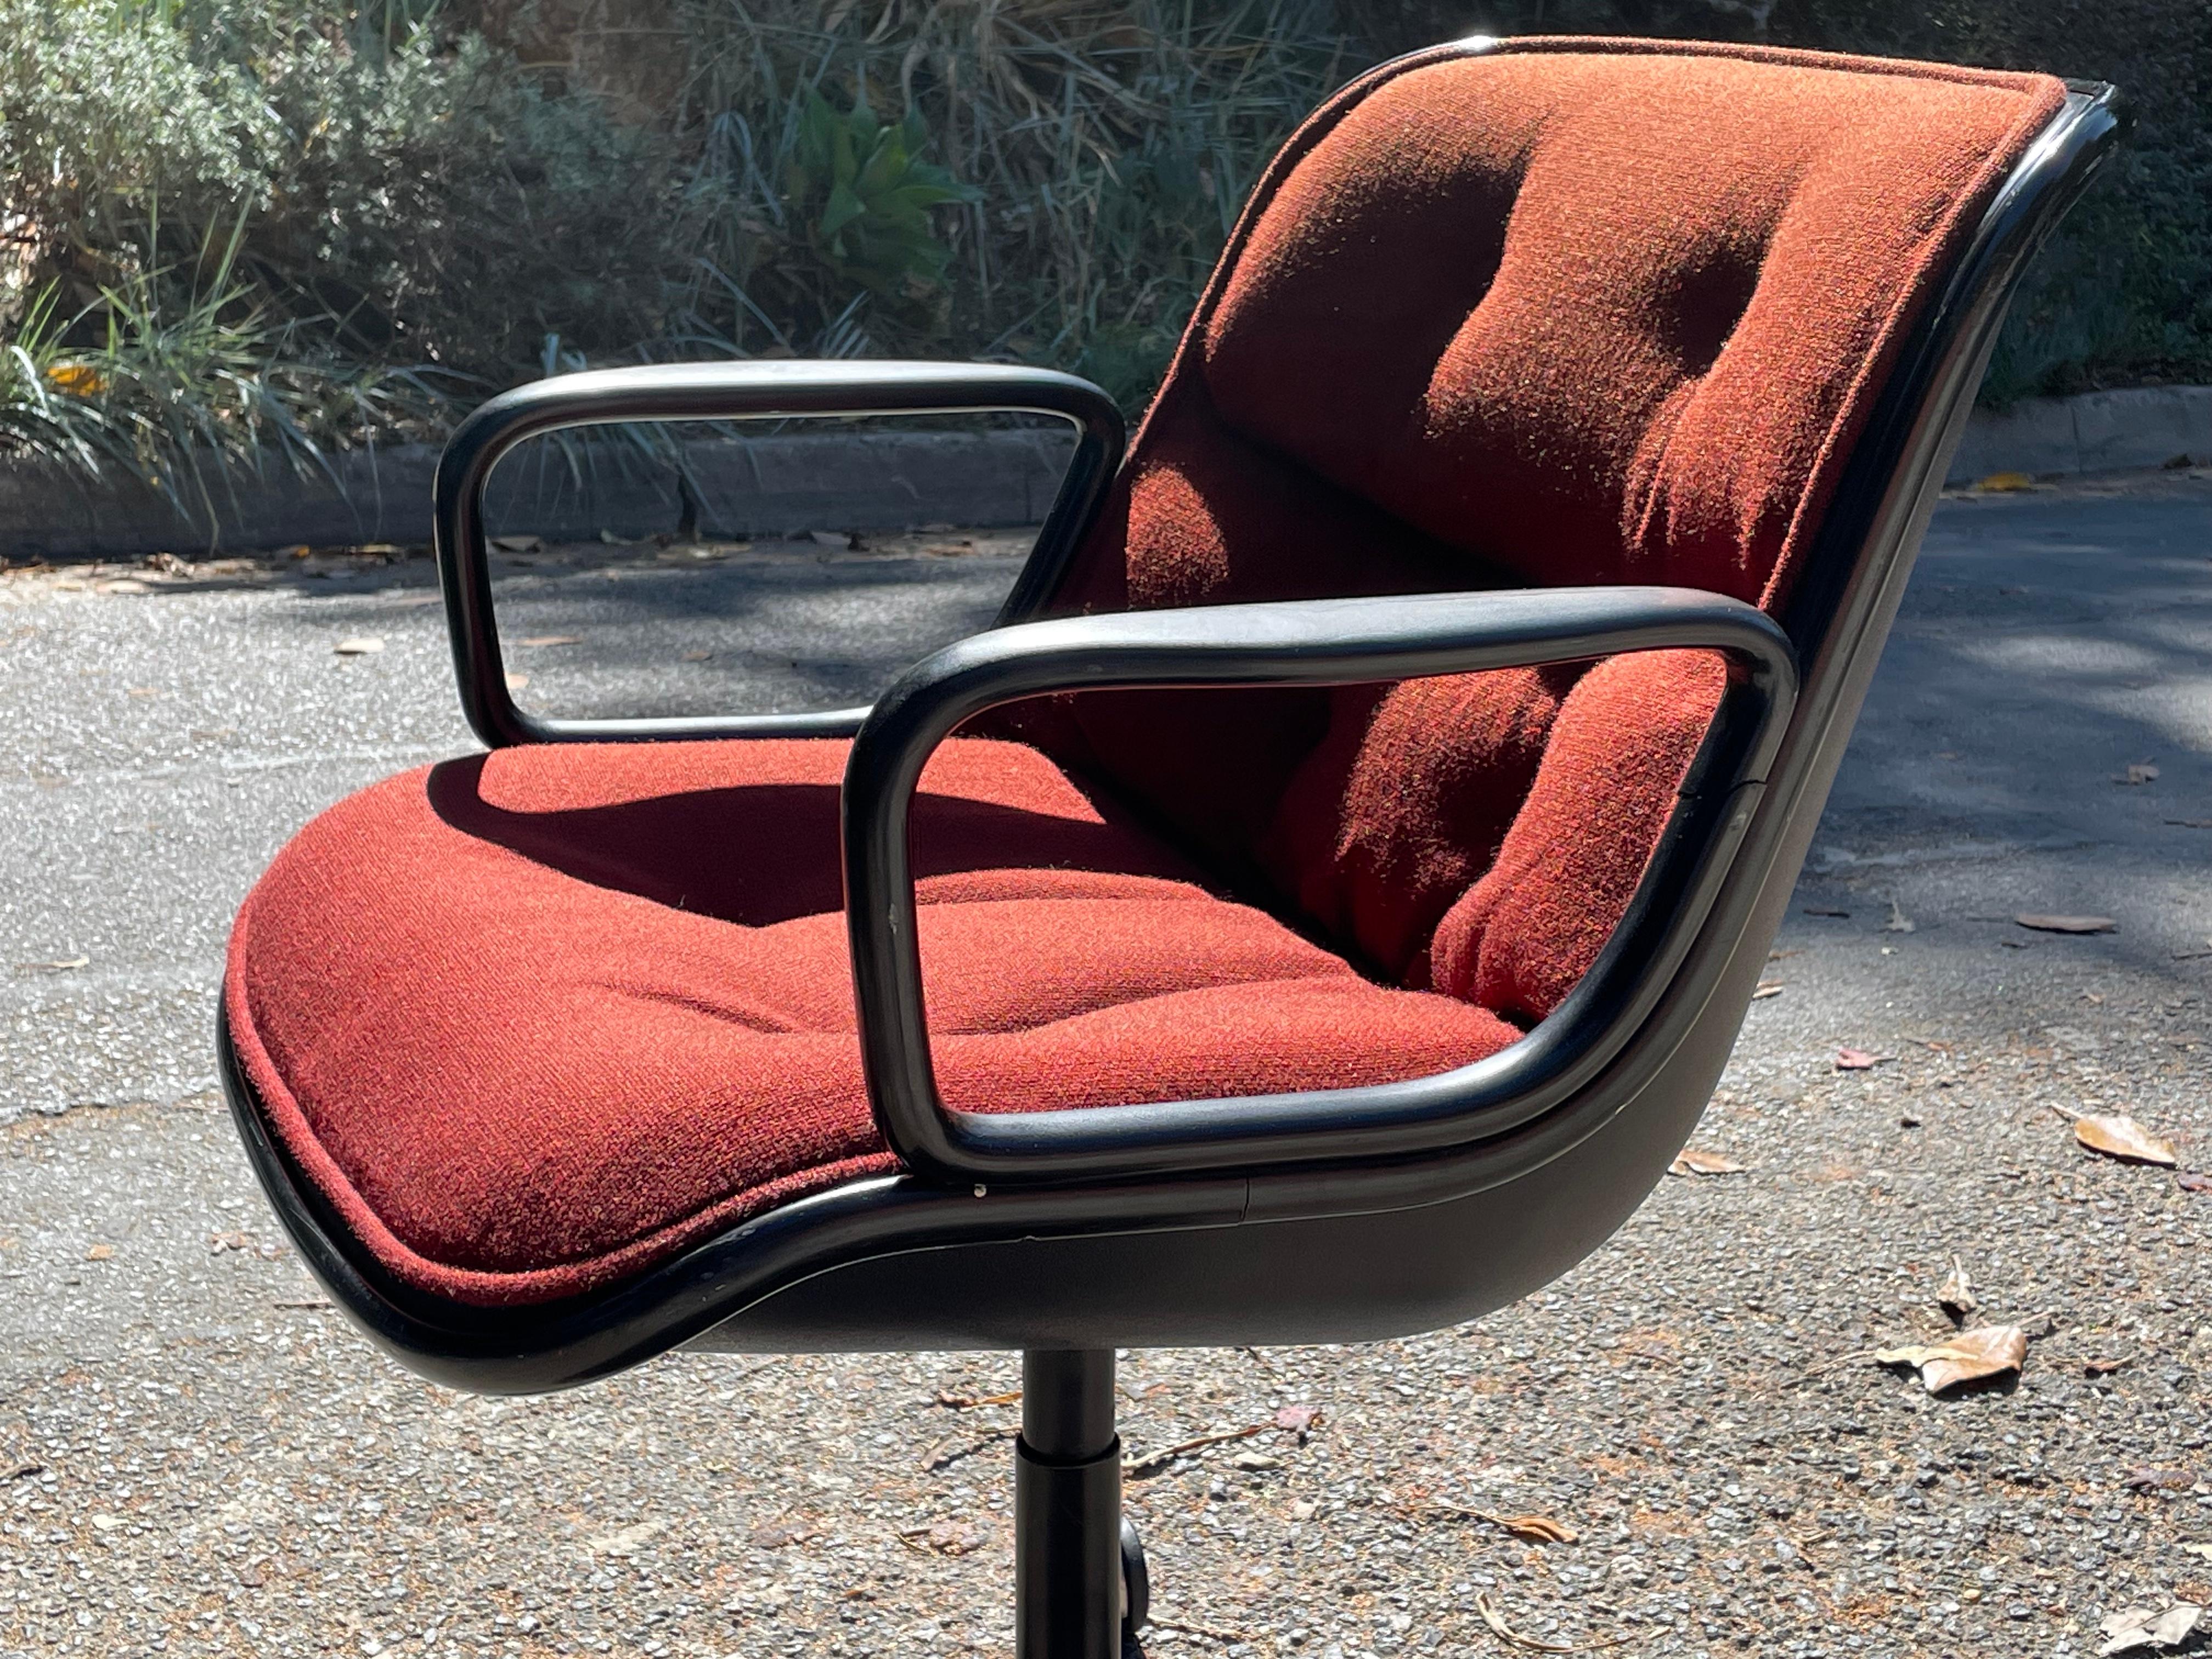 Gorgeous vintage original red orange Pollock desk chair / executive chair designed by Charles Pollack for Knoll. This is original orange red fabric in almost pristine original condition.


On the classic 4-star chrome pedestal base. 

Very good